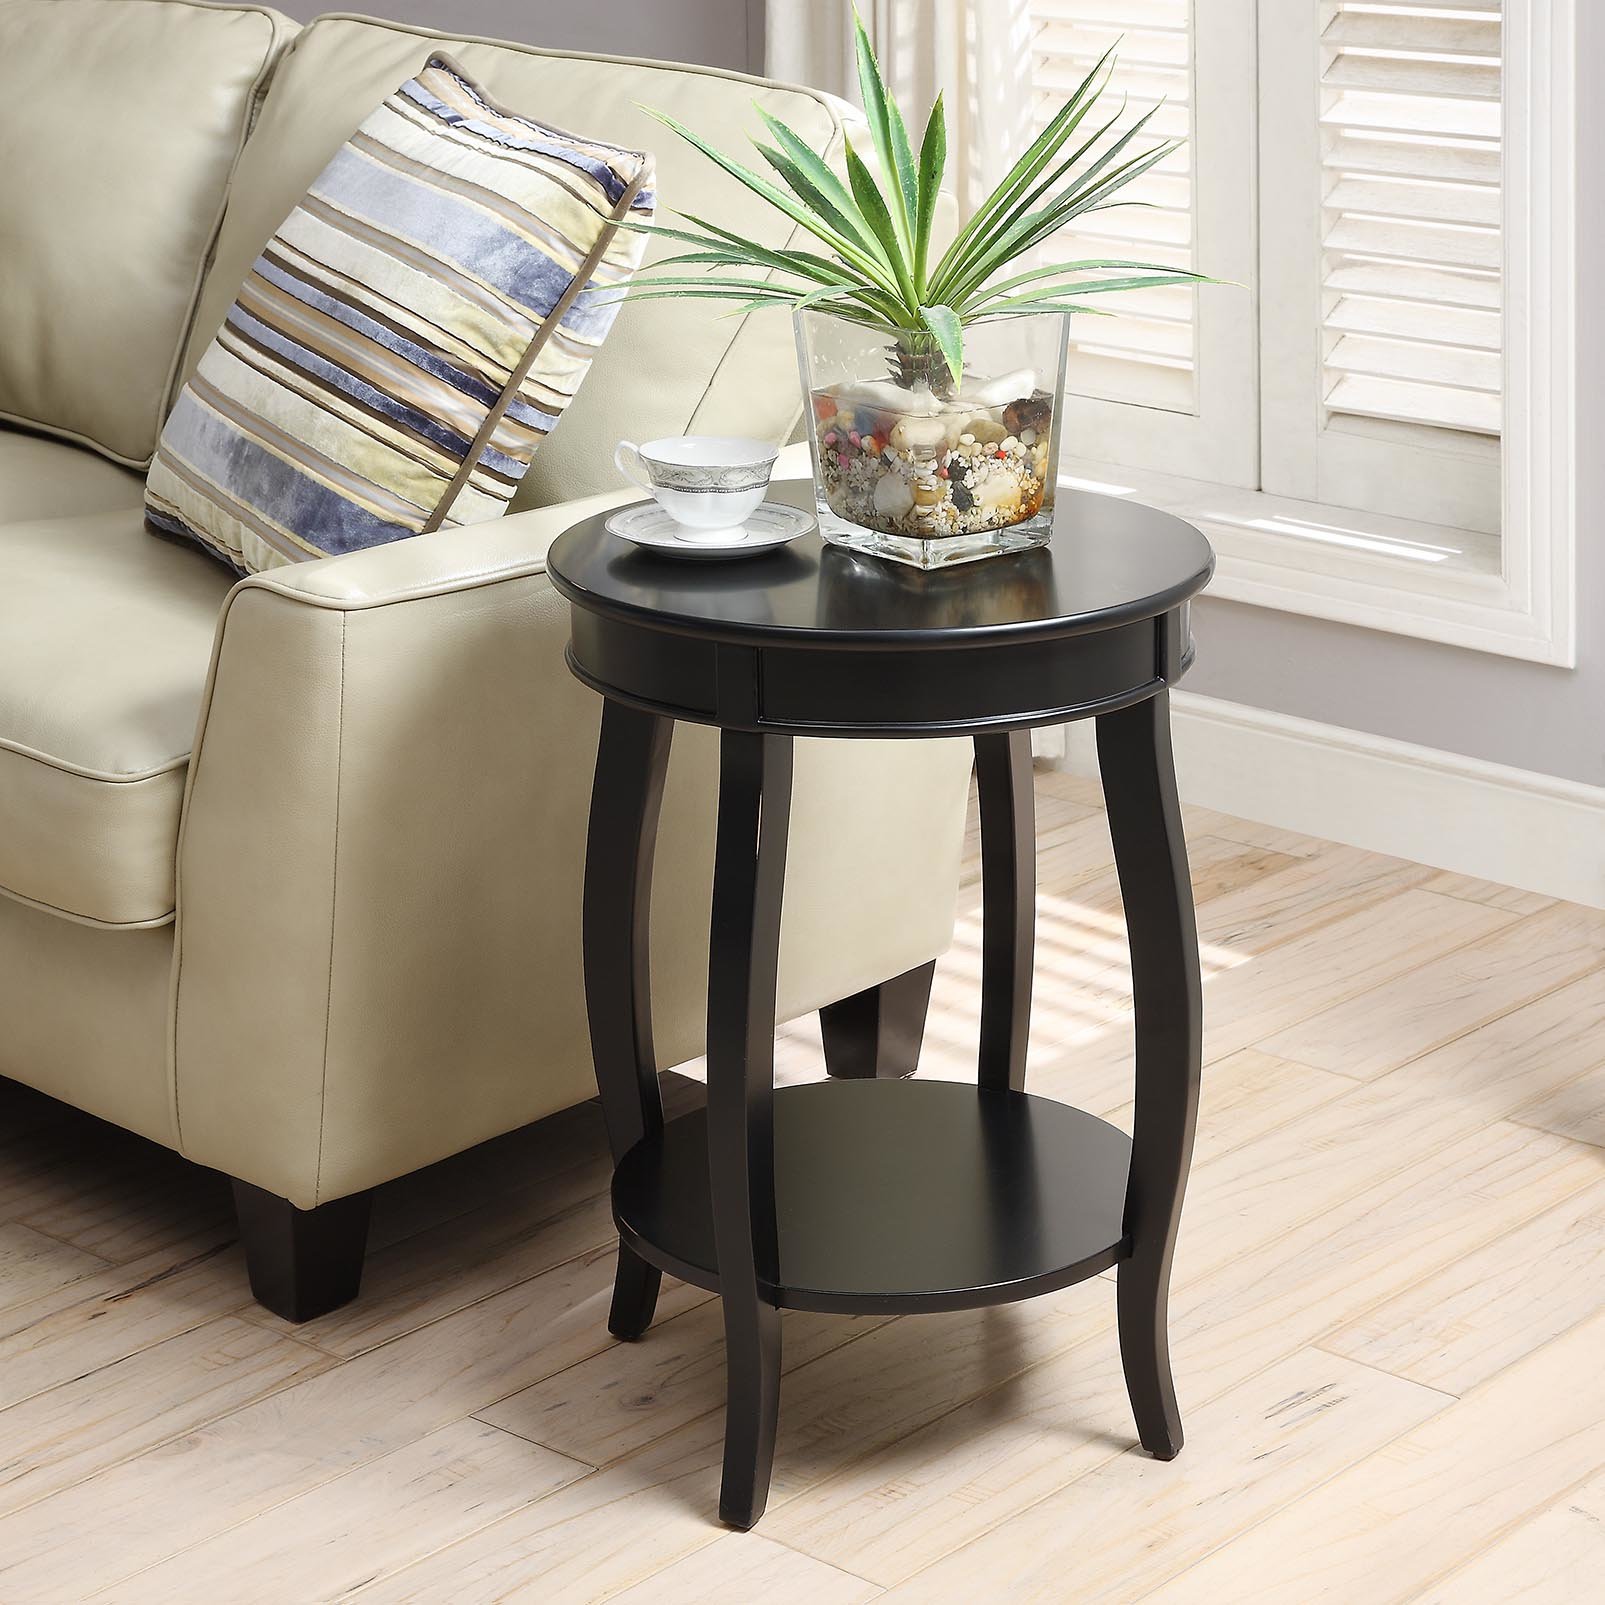 one source living yvonne end table reviews mercer accent vintage oak pier furniture chairs chestnut black gloss coffee bunnings bench seat outdoor umbrella side handmade ideas